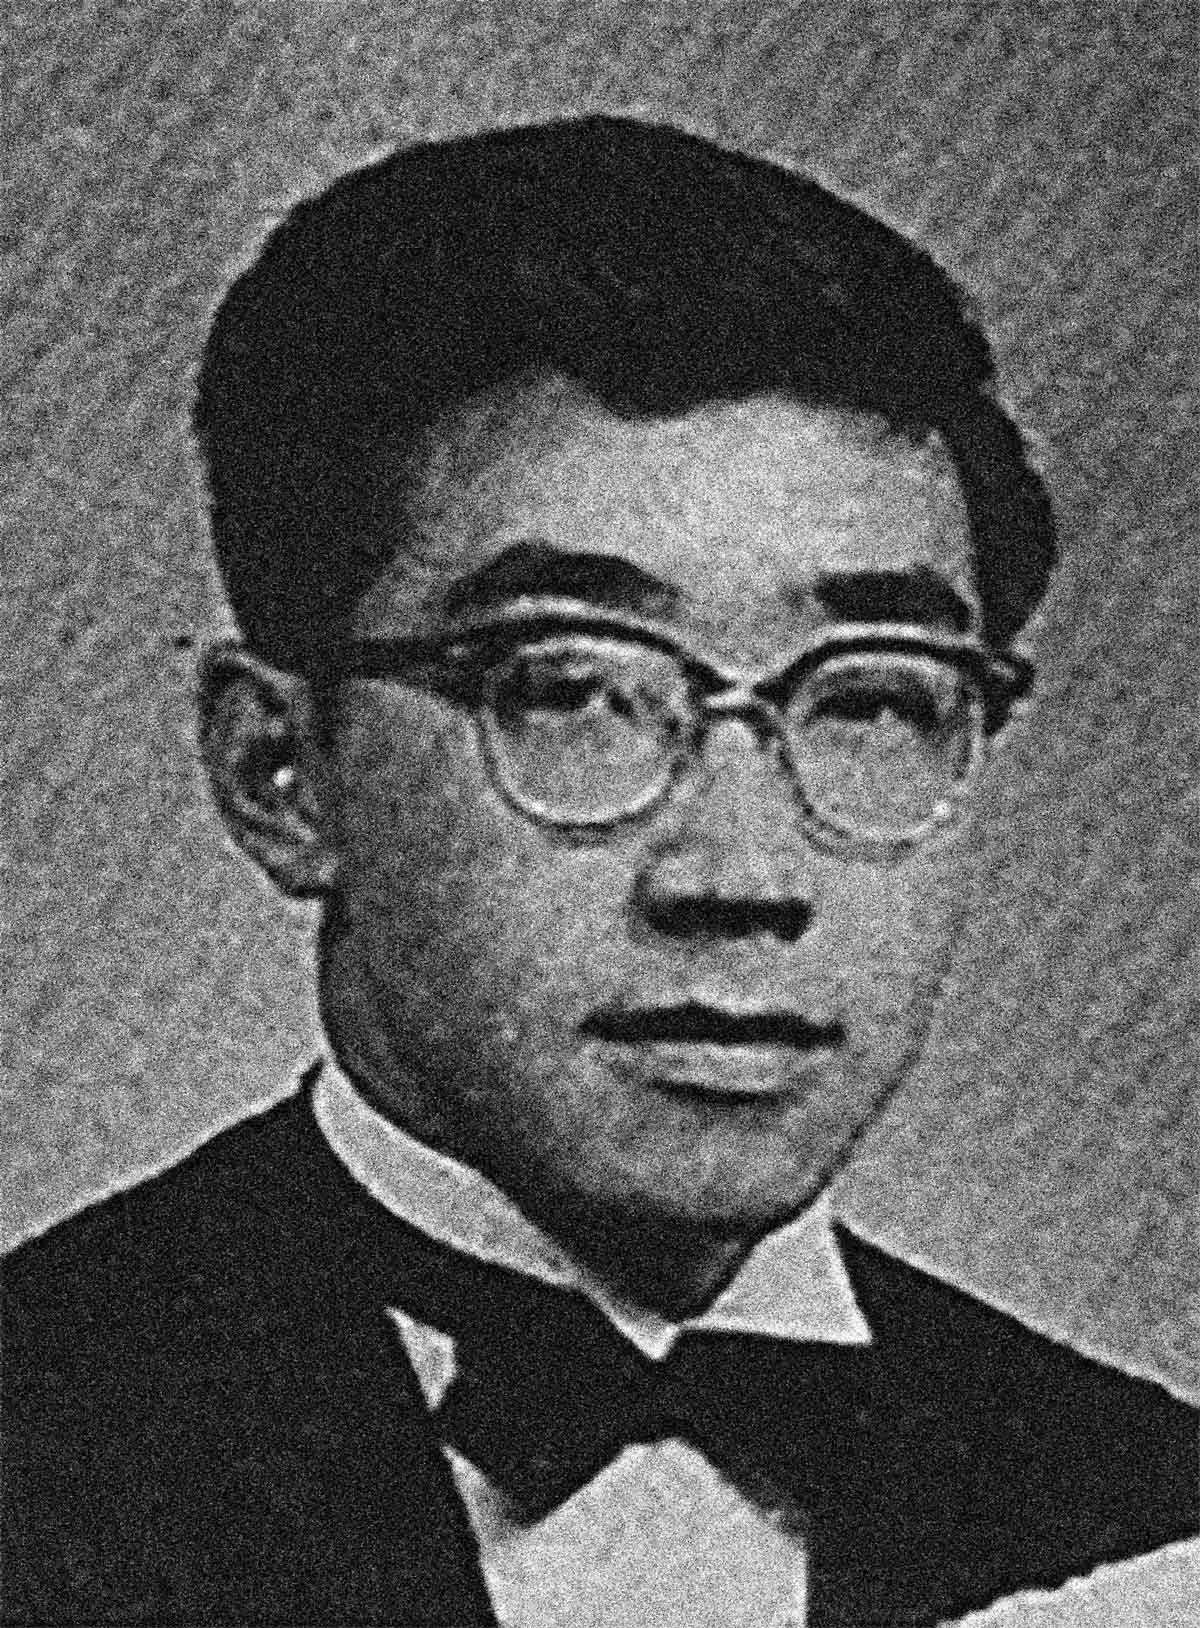 Image shows a young man wearing a bowtie and glasses.